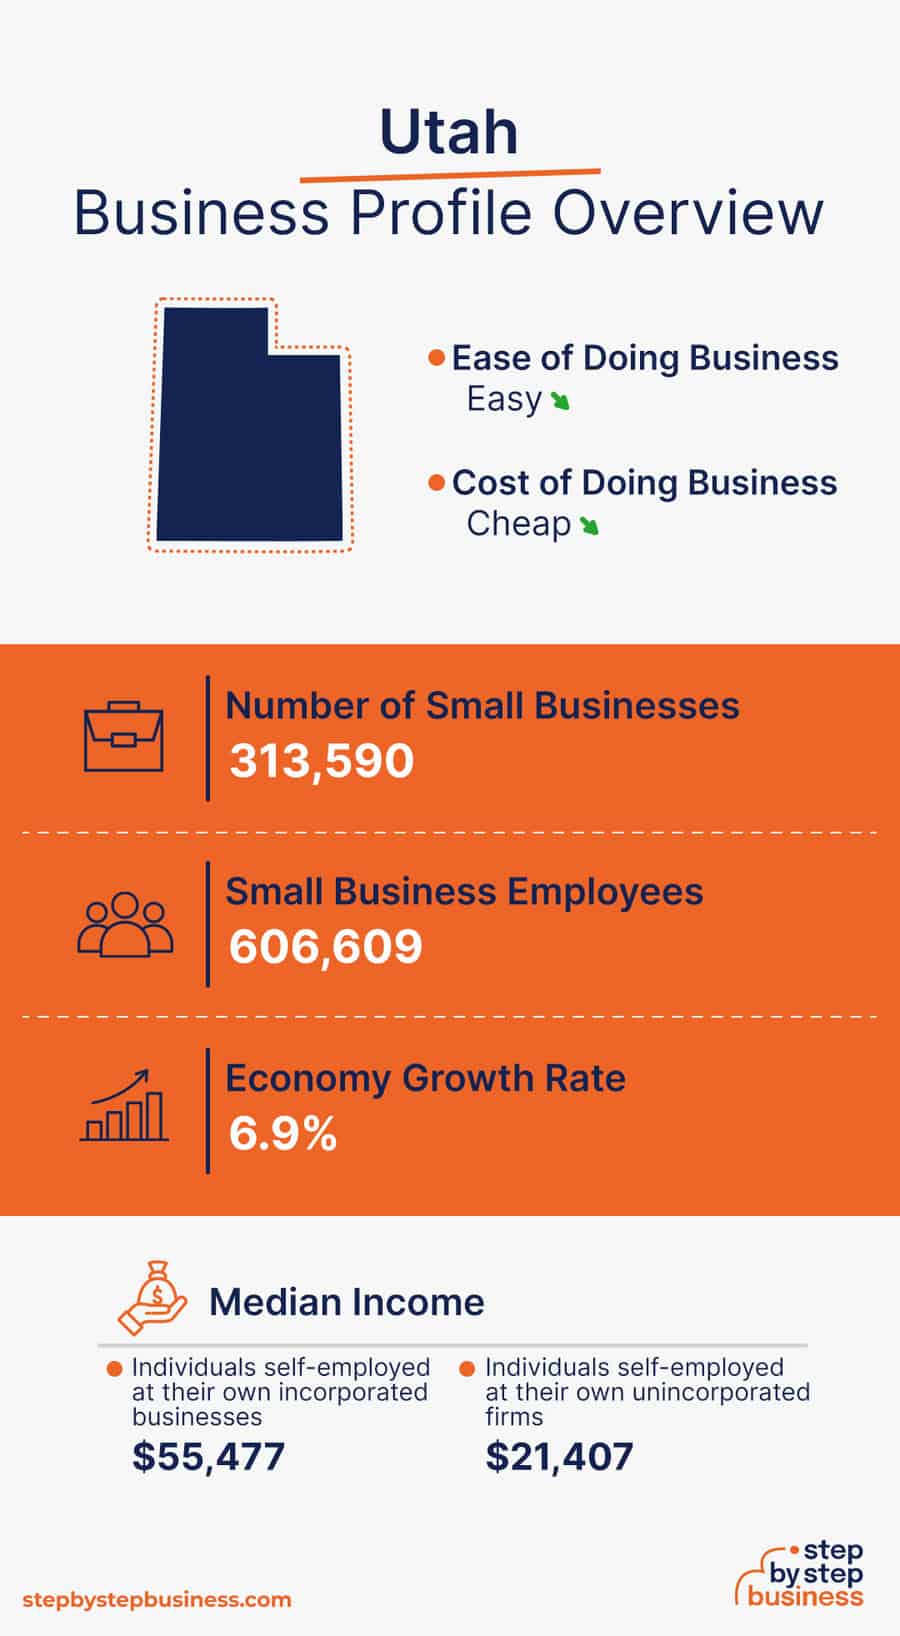 Utah Business Profile Overview